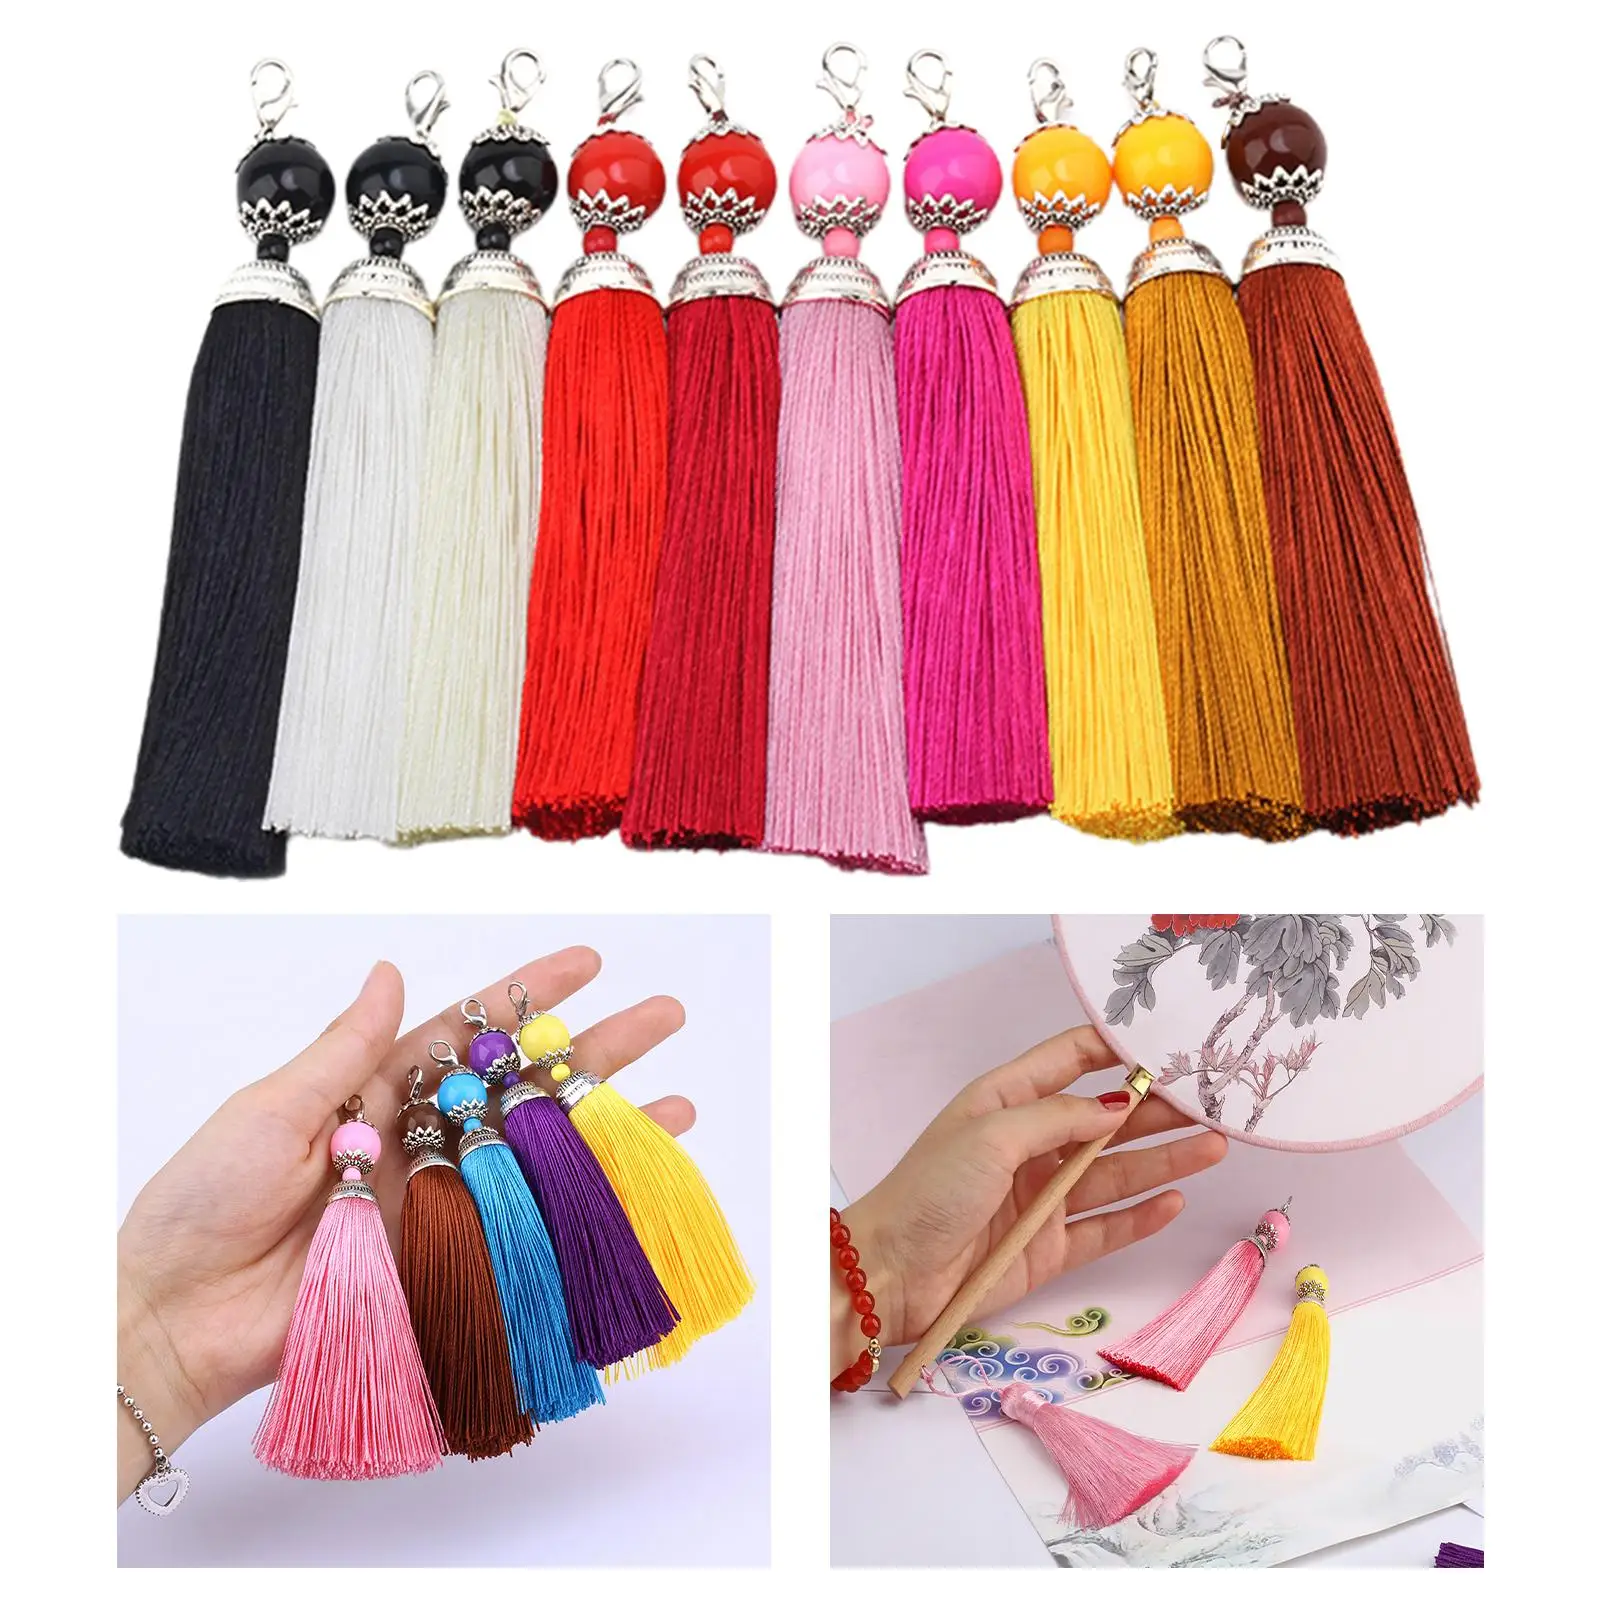 10x Tassels for Jewelry Making, with Lobster Buckle Decorative Decorative Tassels Keychain Tassel Charms for Necklaces Bracelets